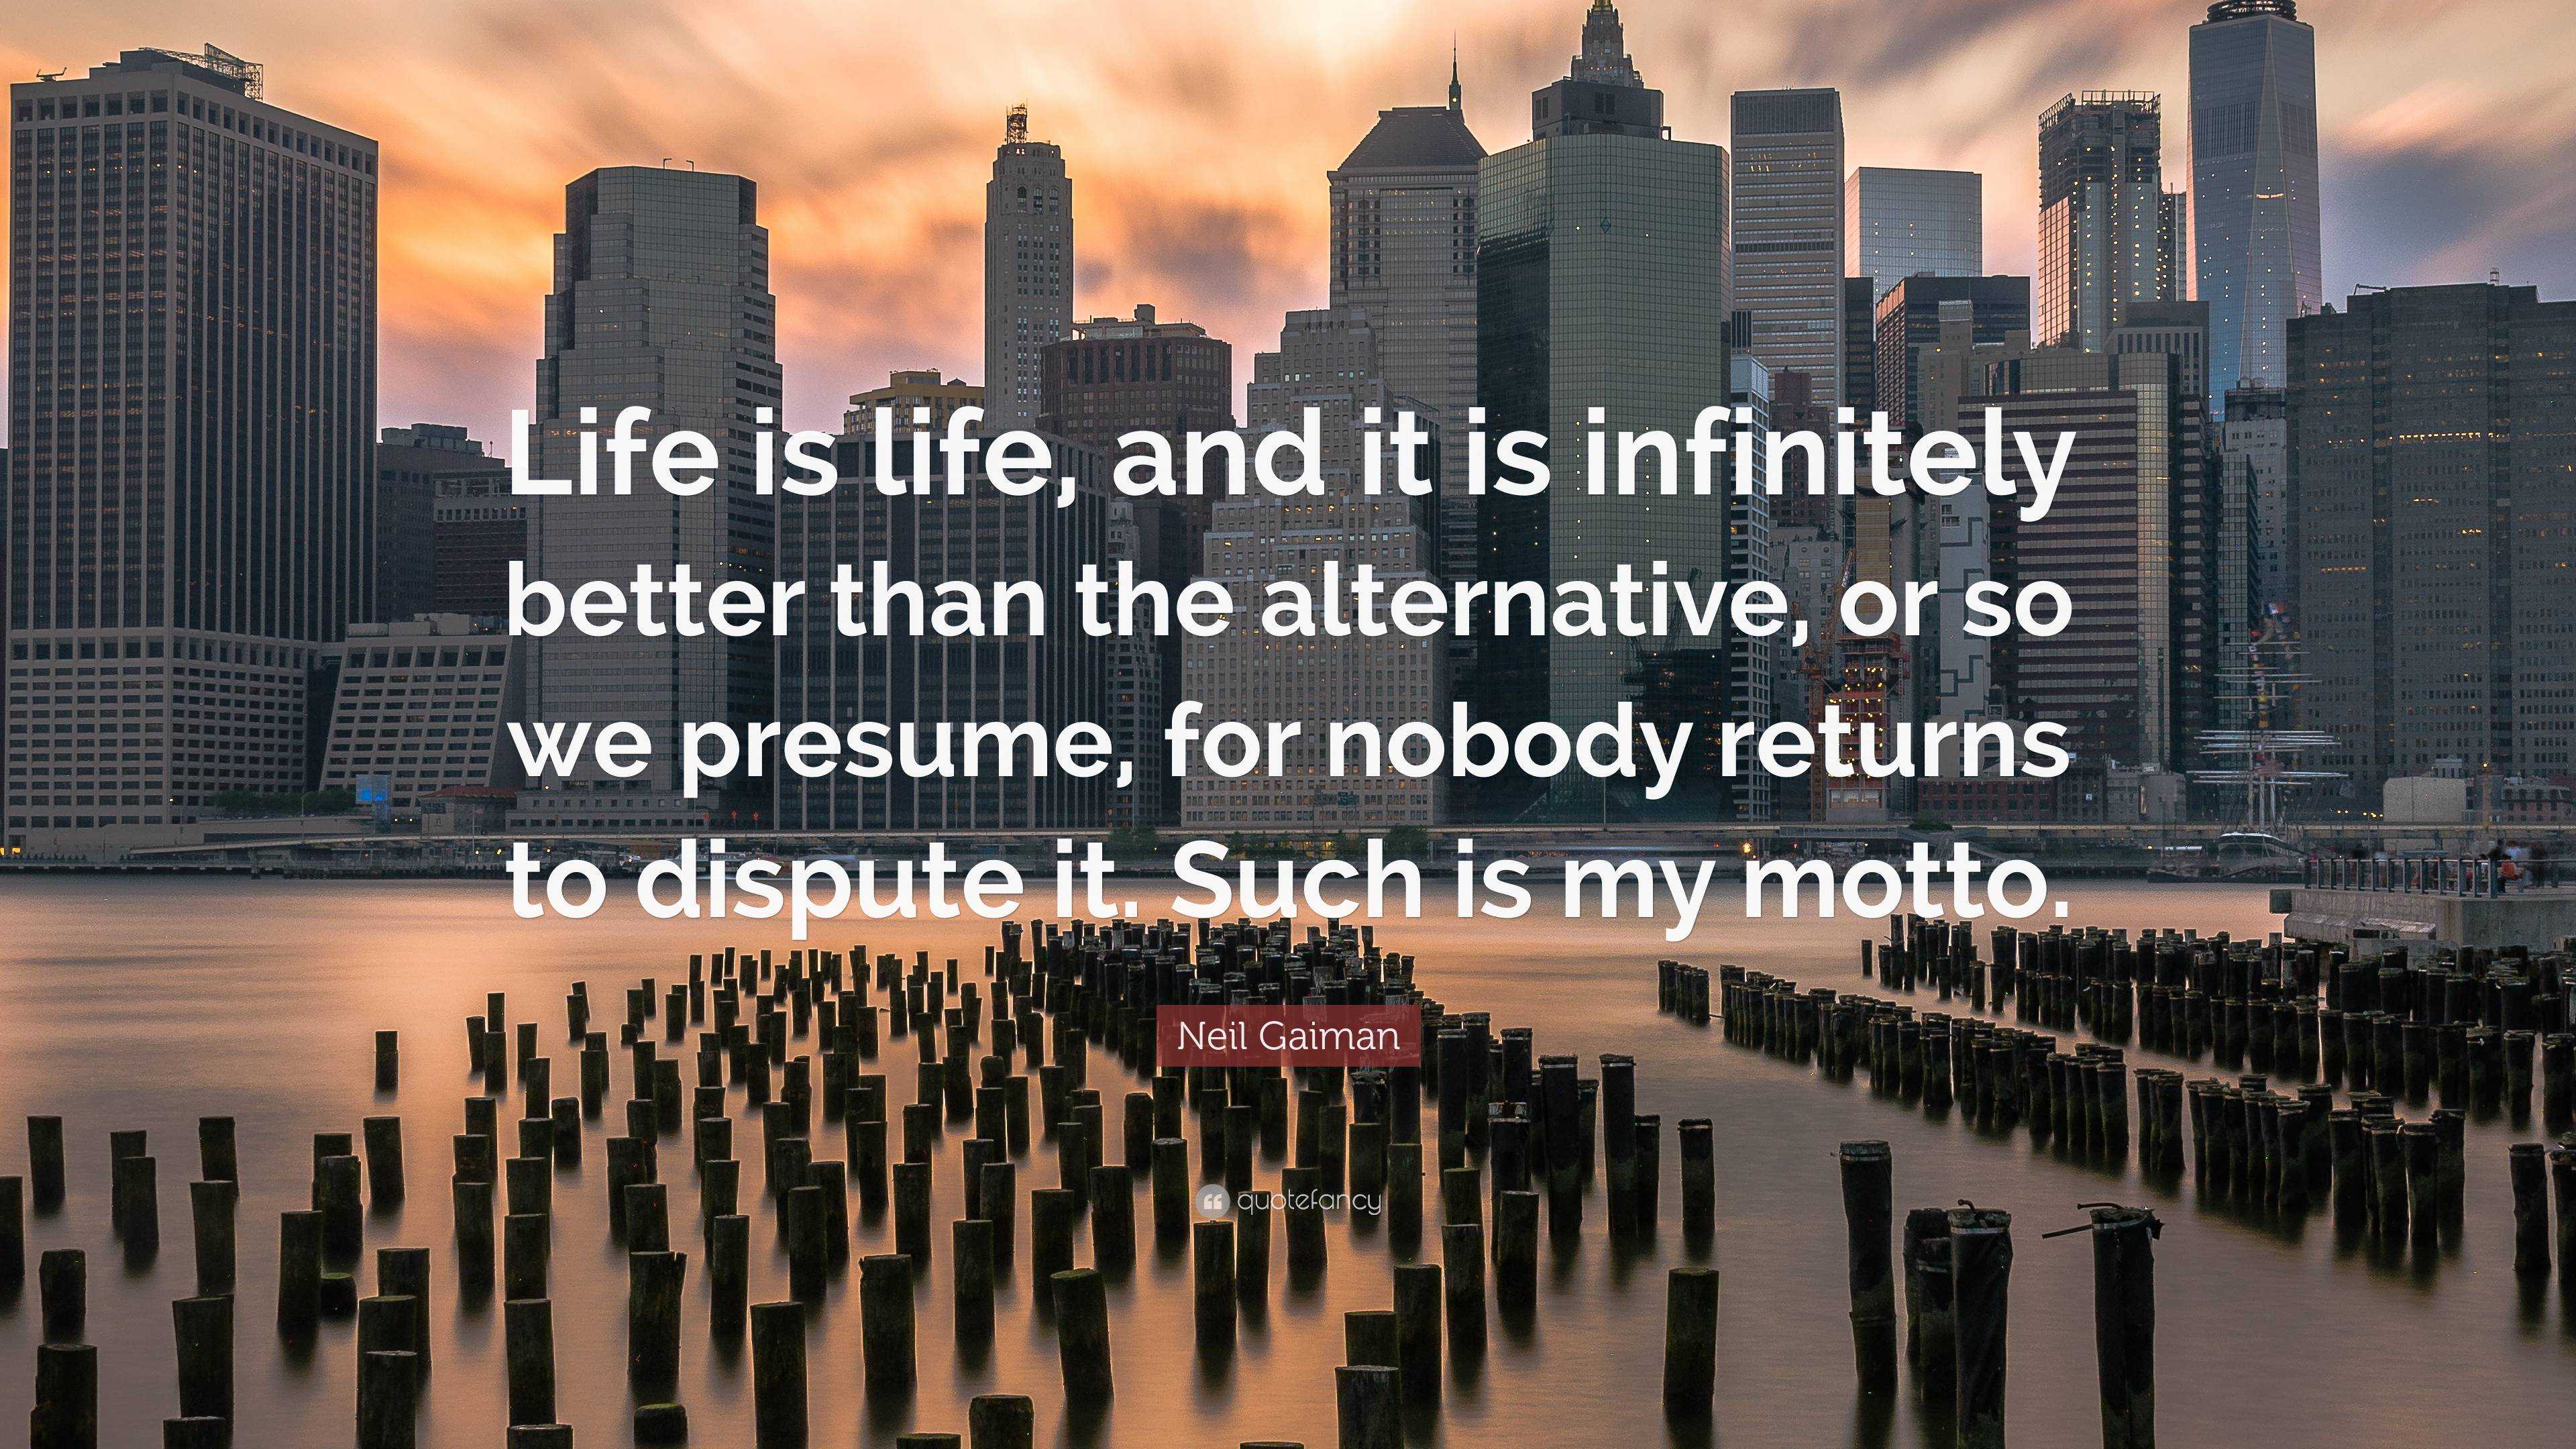 Neil Gaiman Quote: “Life is life, and it is infinitely better than the ...